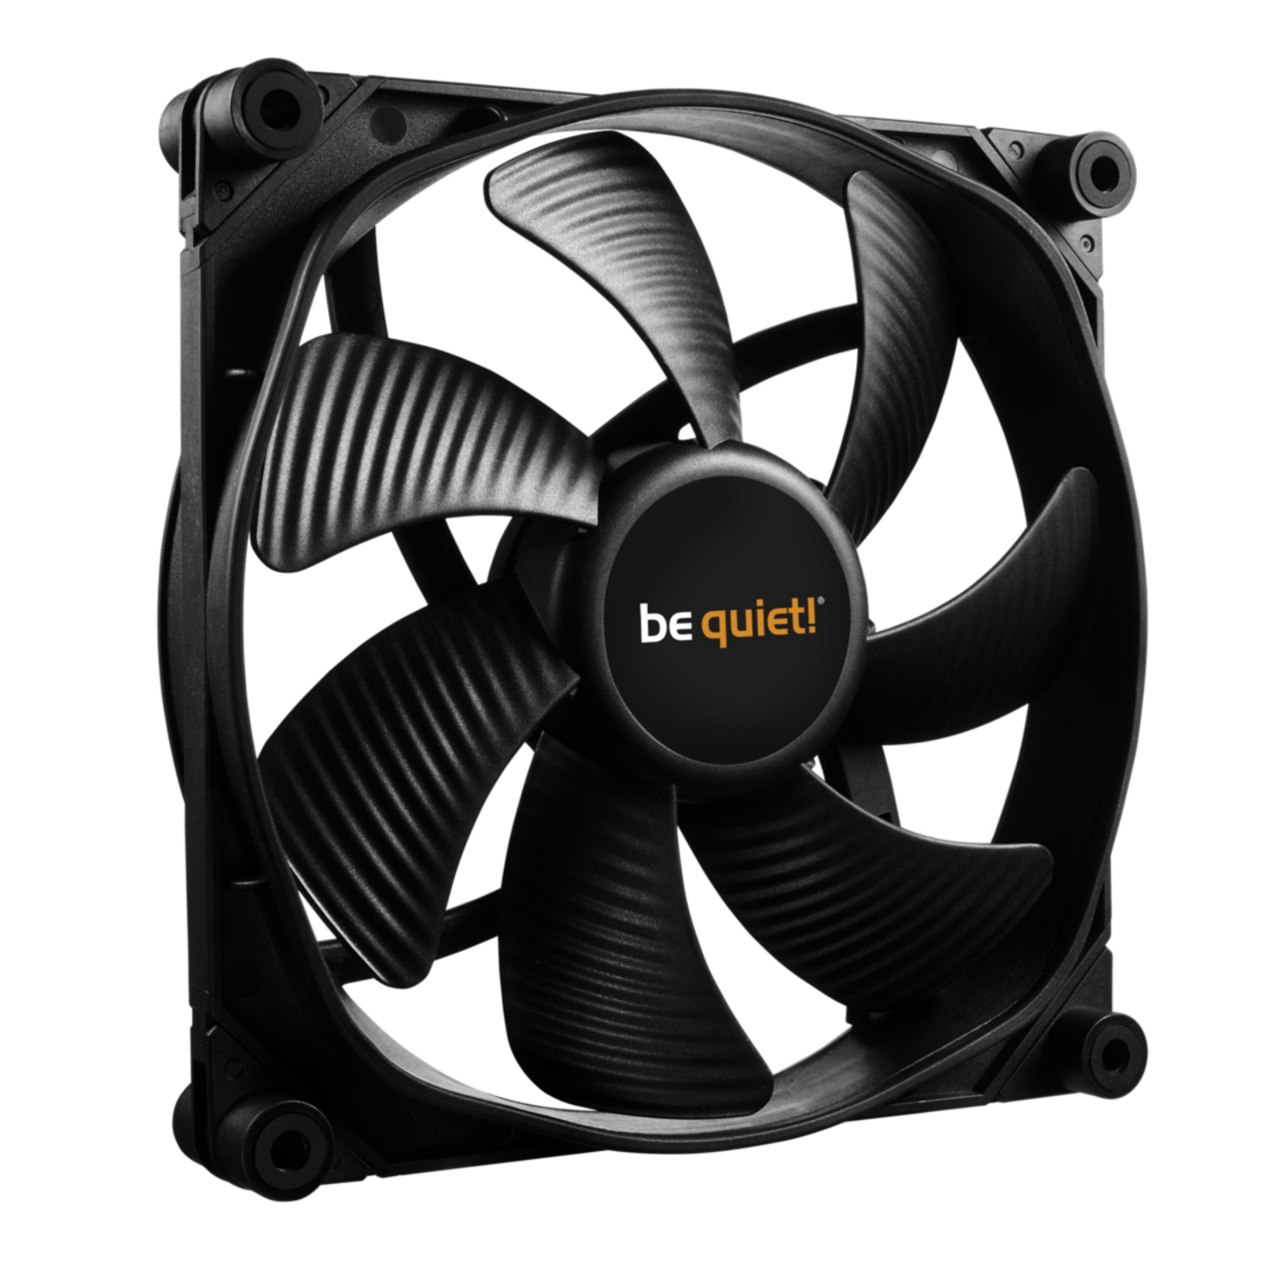 Get additional fans and maintain good neutral airflow